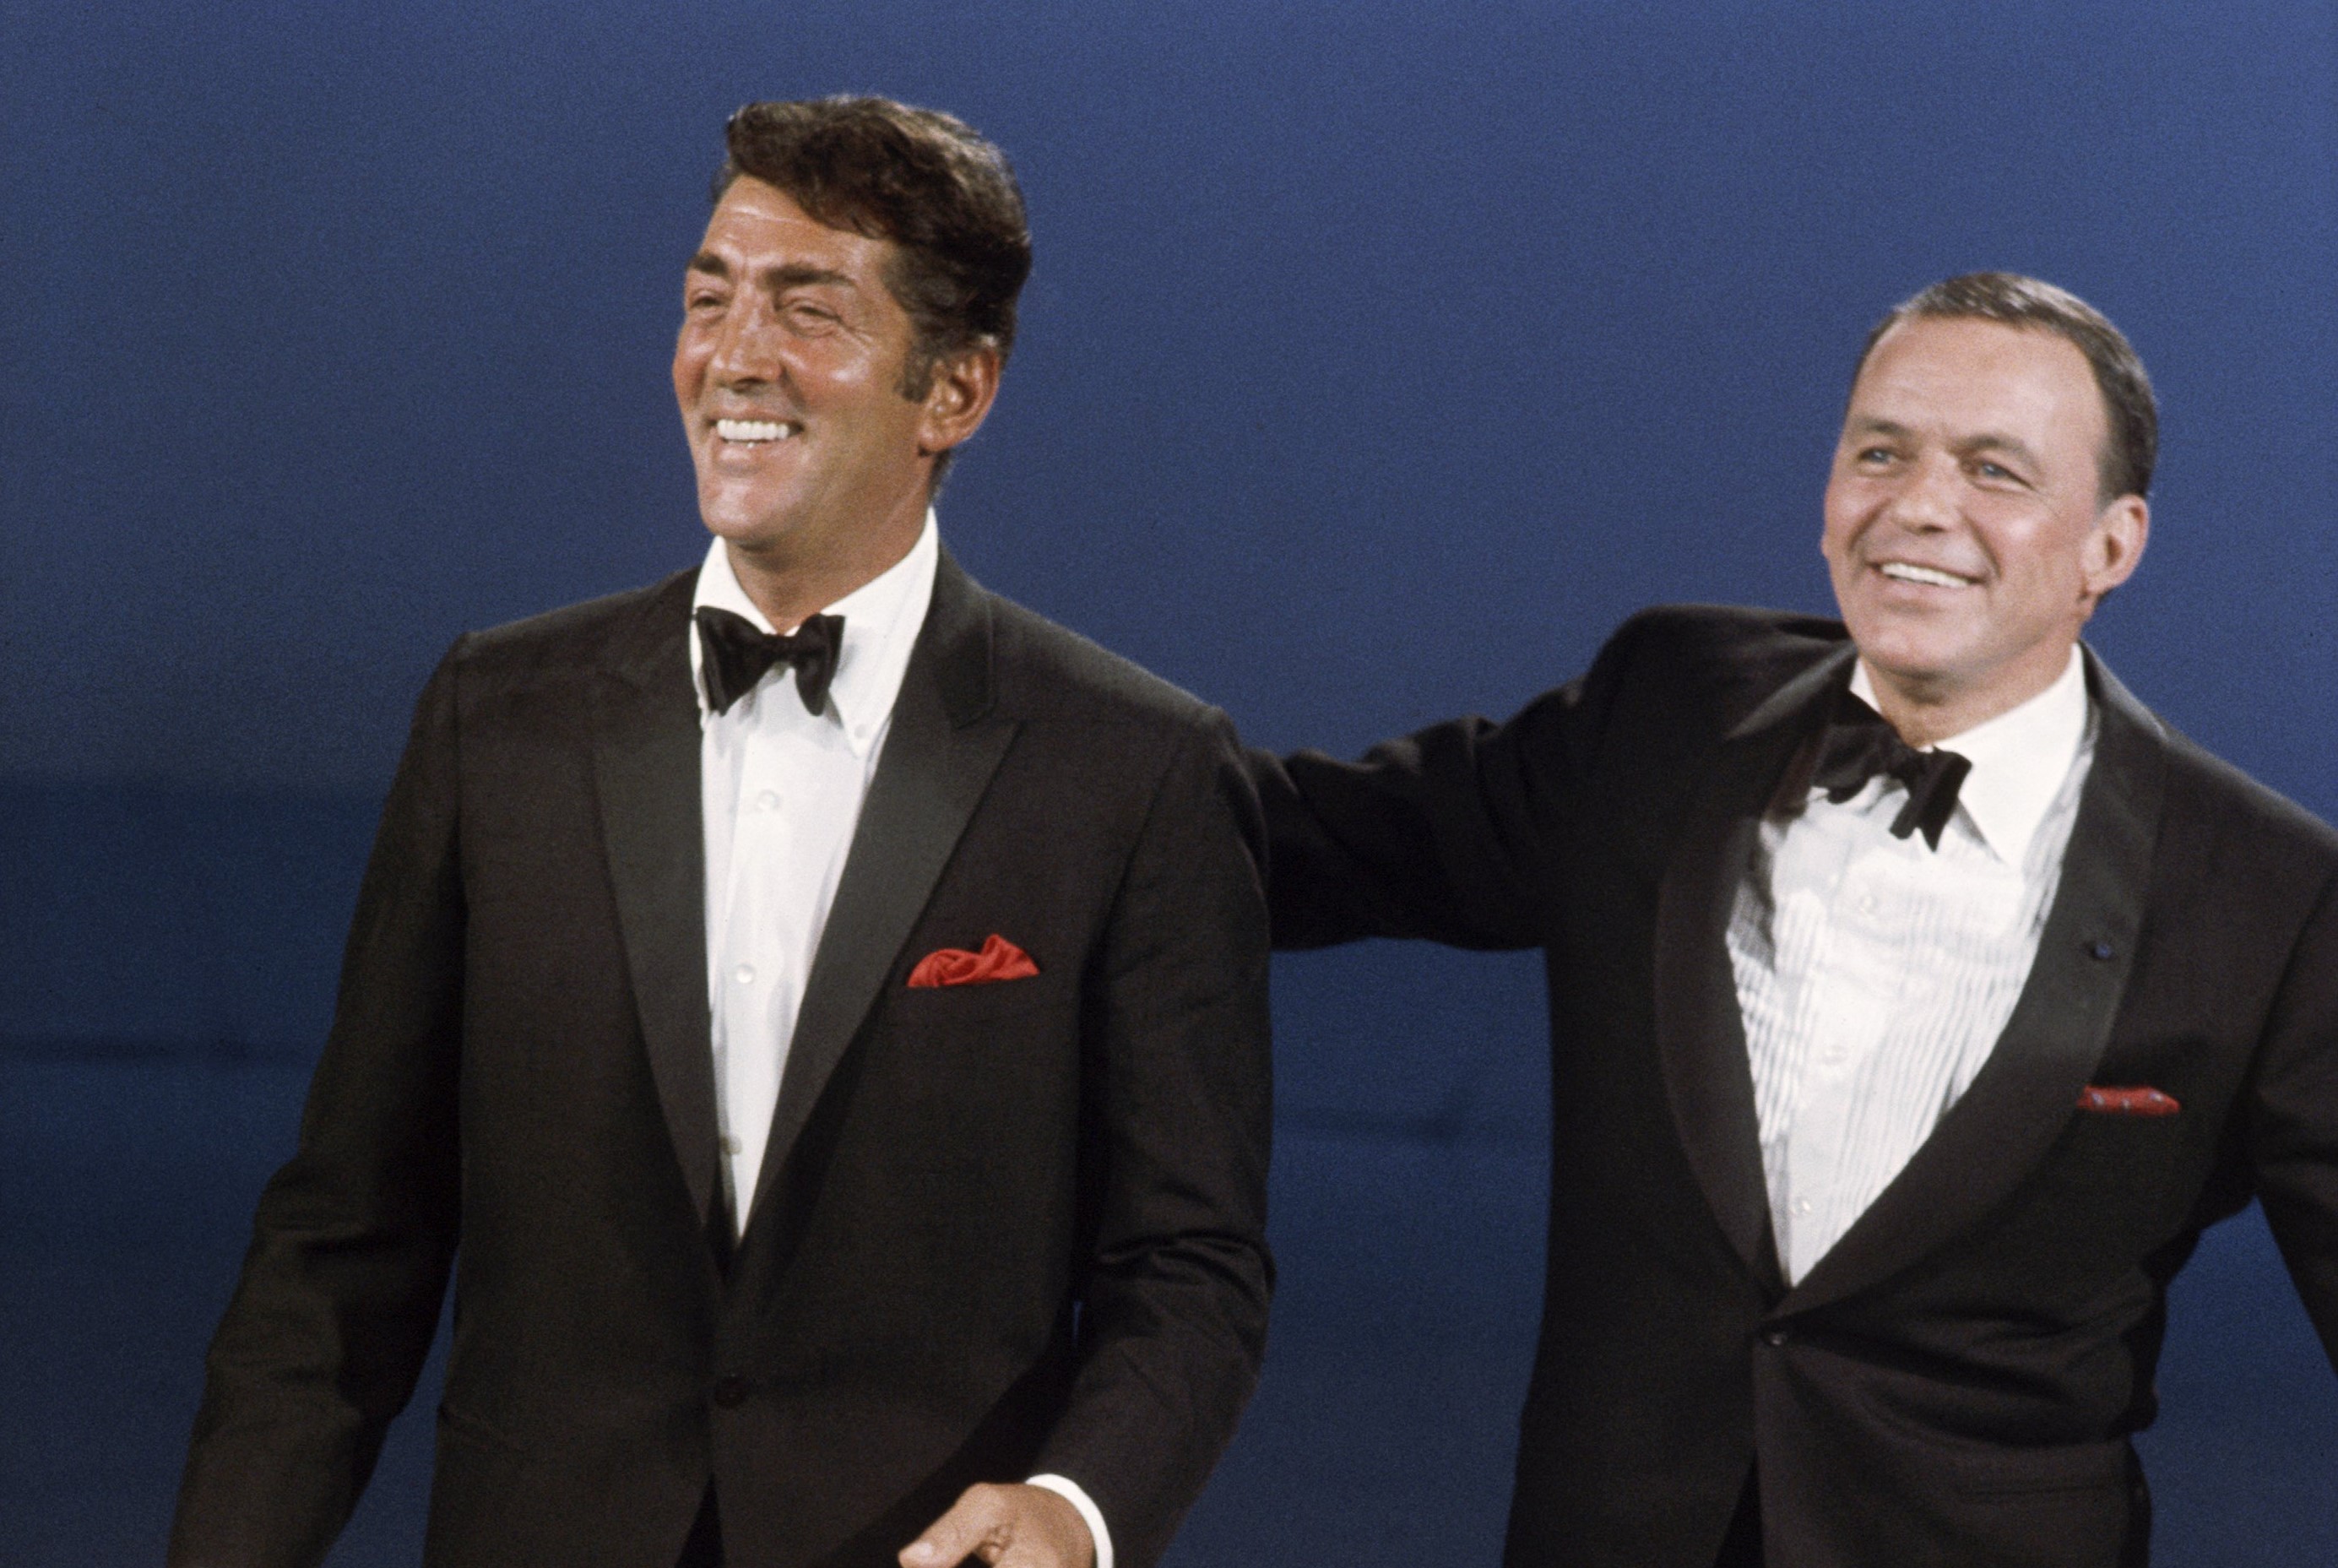 Frank Sinatra and Dean Martin wear tuxedos with red pocket squares. Sinatra stands with his hand on Martin's back.